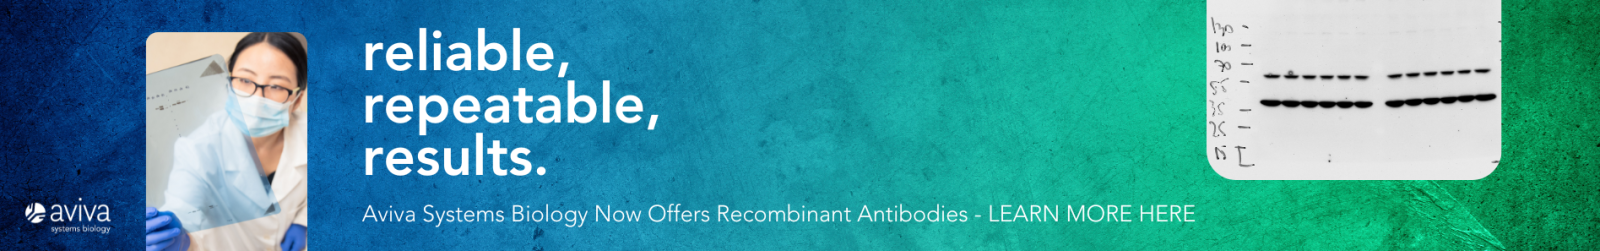 Aviva Systems Biology now offers recombinant antibodies